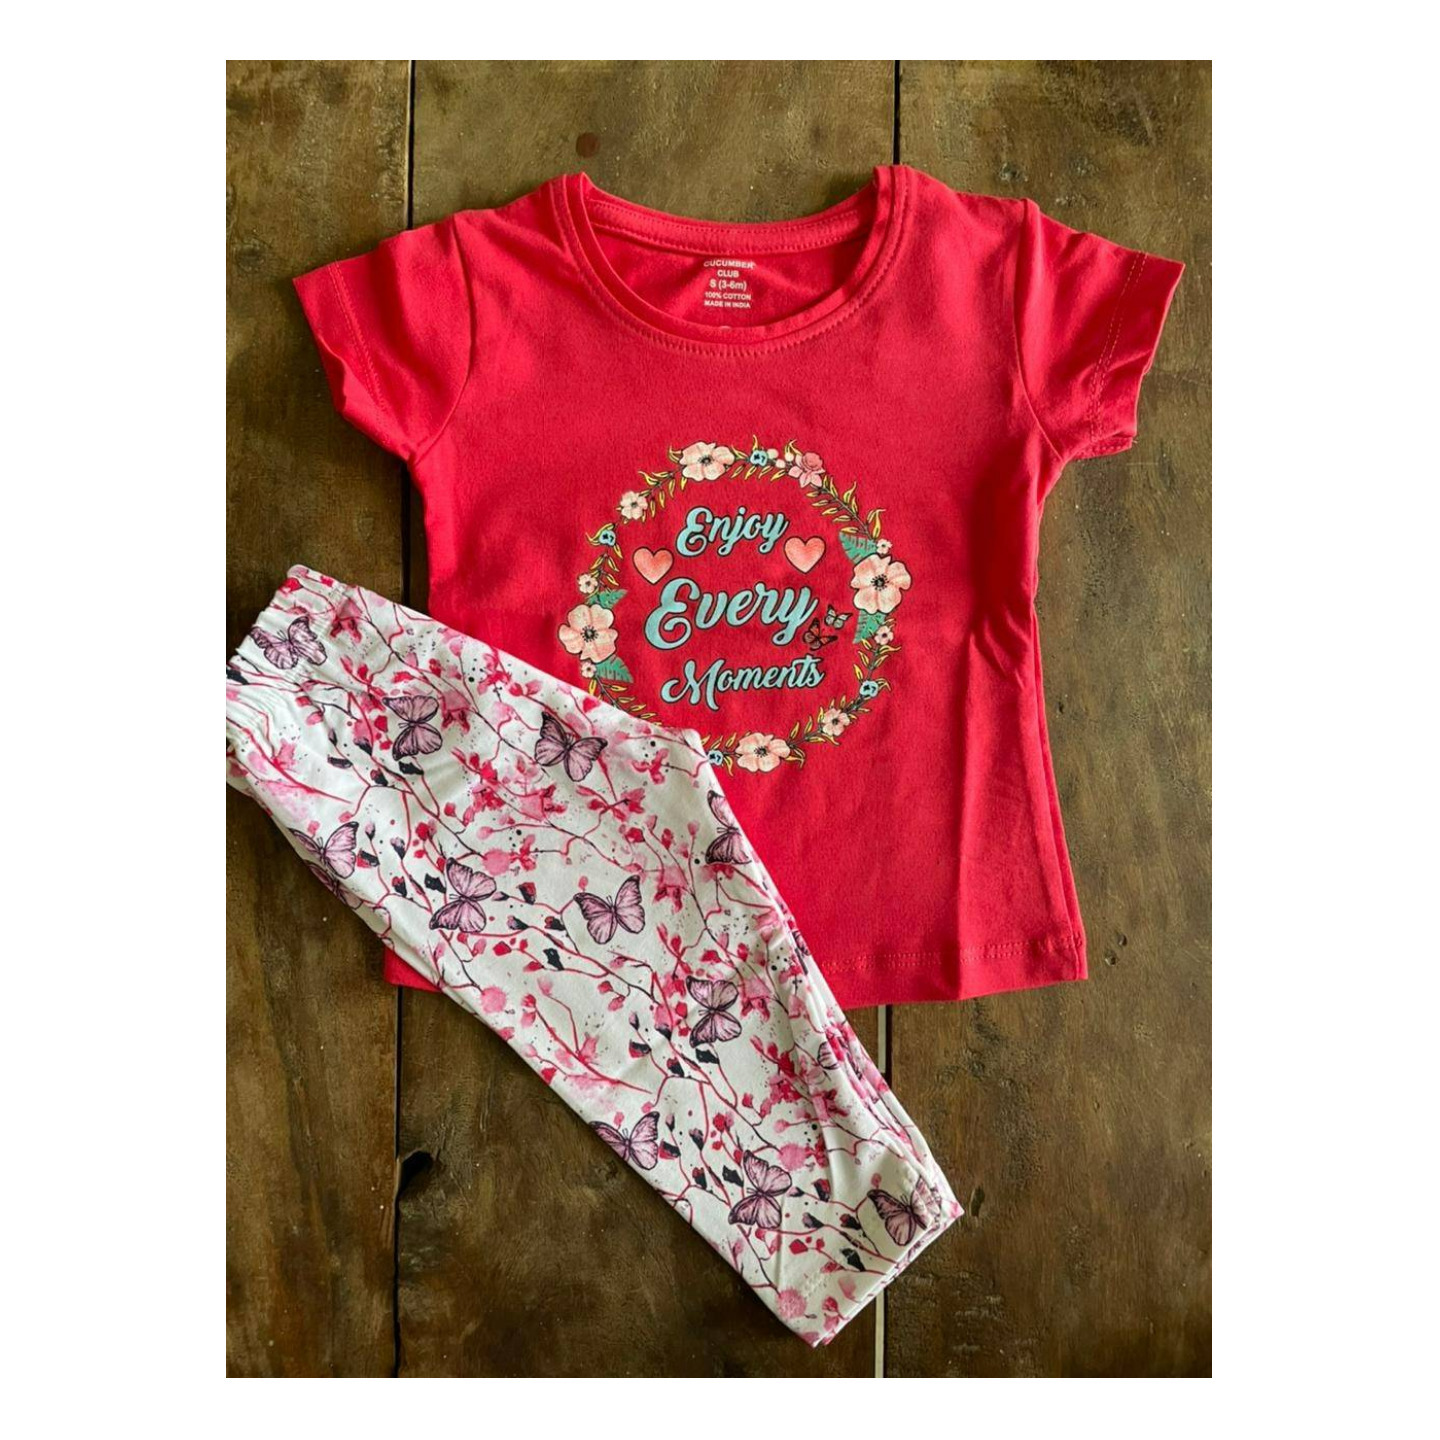 Cucumber Club Half Sleeves Top & Leggings Rs 330 Only Made In India 0 to 12 Months Size